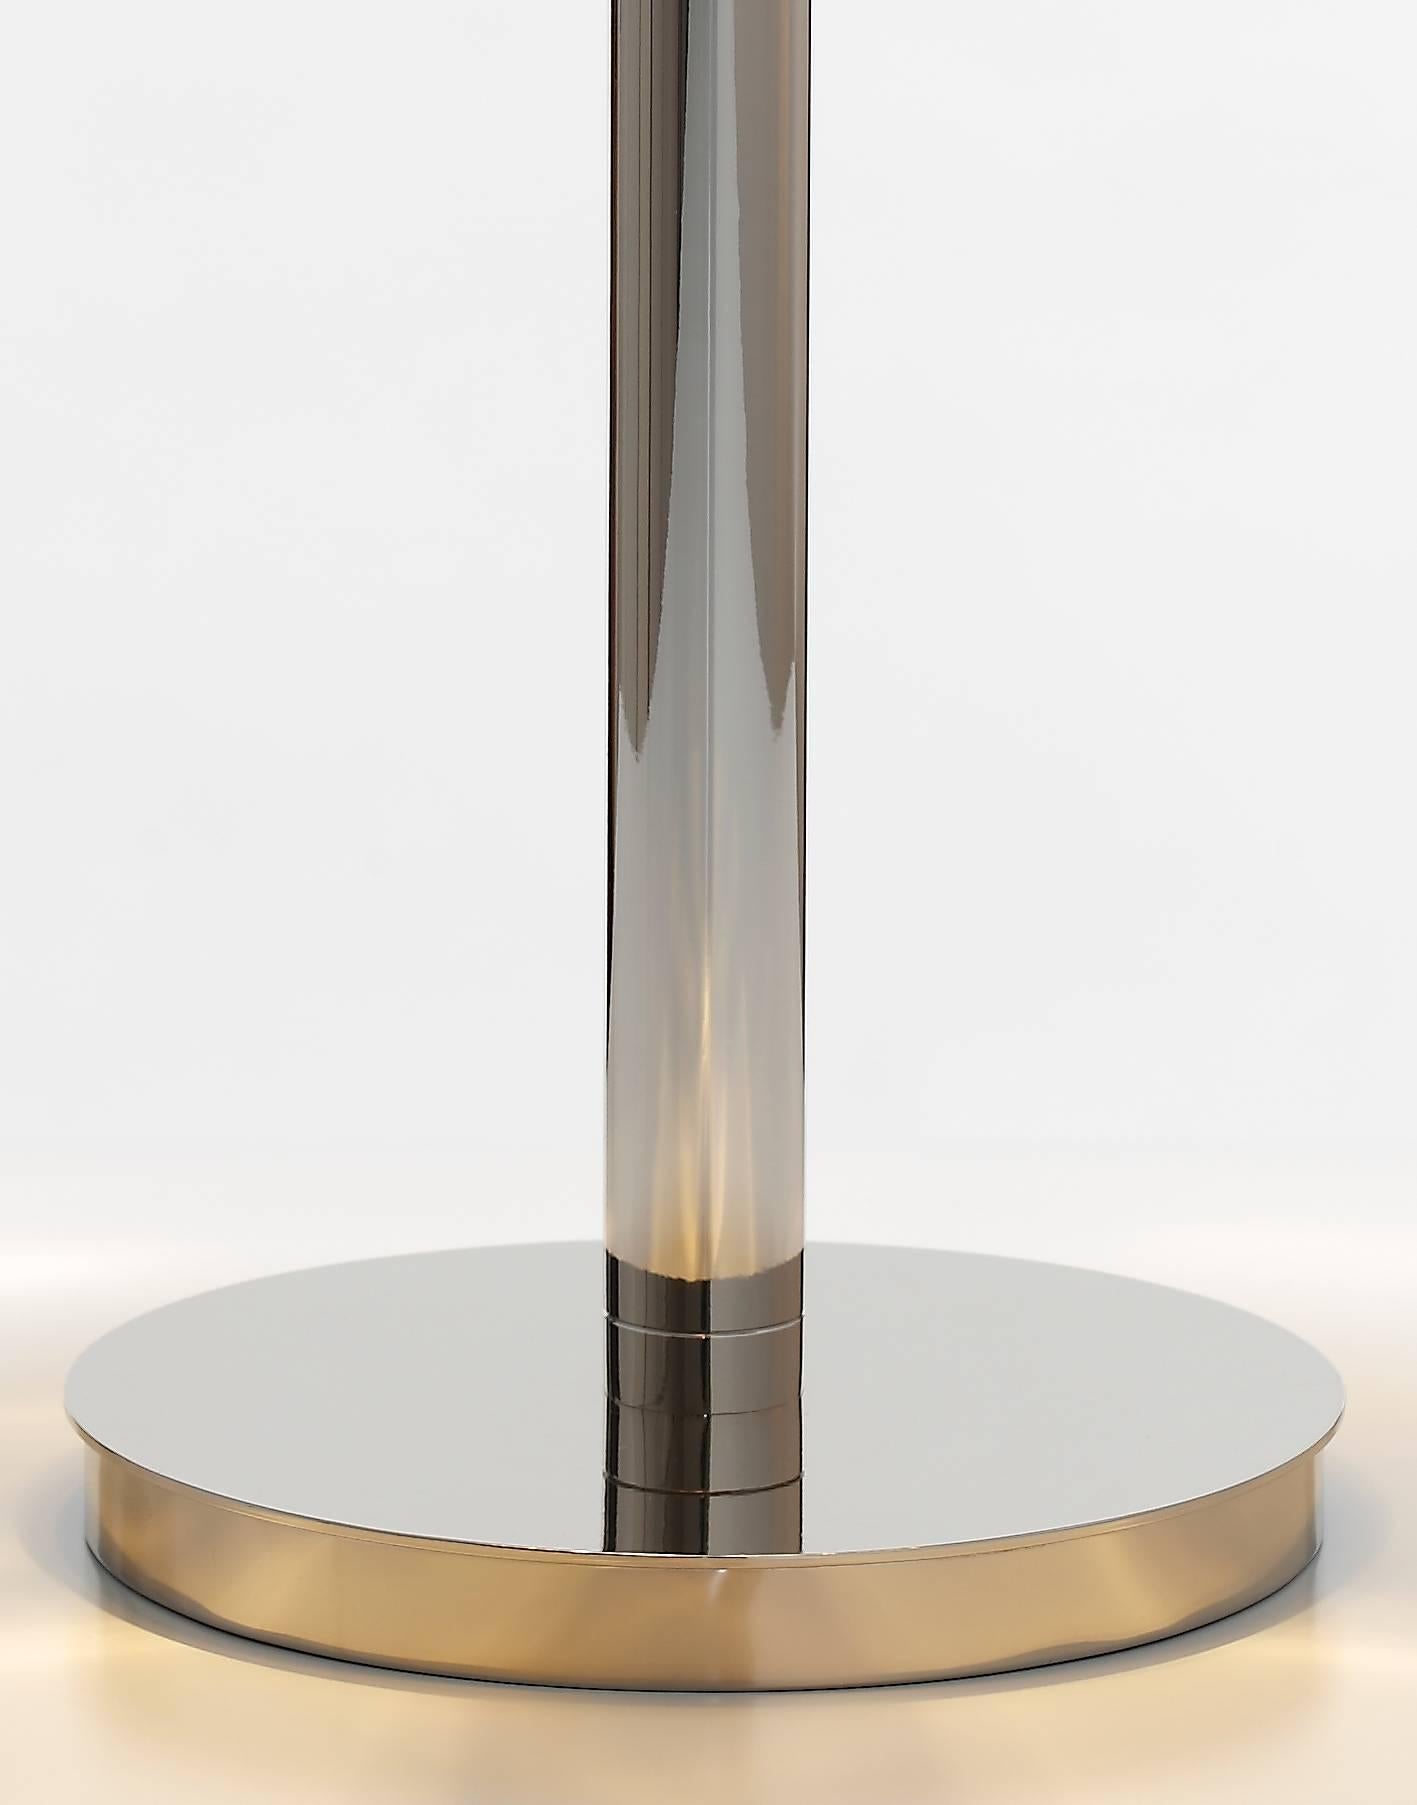 A simple but very stylish table lamp inspired by the Art Deco era, beautifully crafted by Portuguese artisans.

Measures (cm):55 x 32
Lamps: Two lamp e14 max. 40w
Class: Class II
Material: Glass/brass
Finish: Nickel
Weight: 6 kg
Packaging